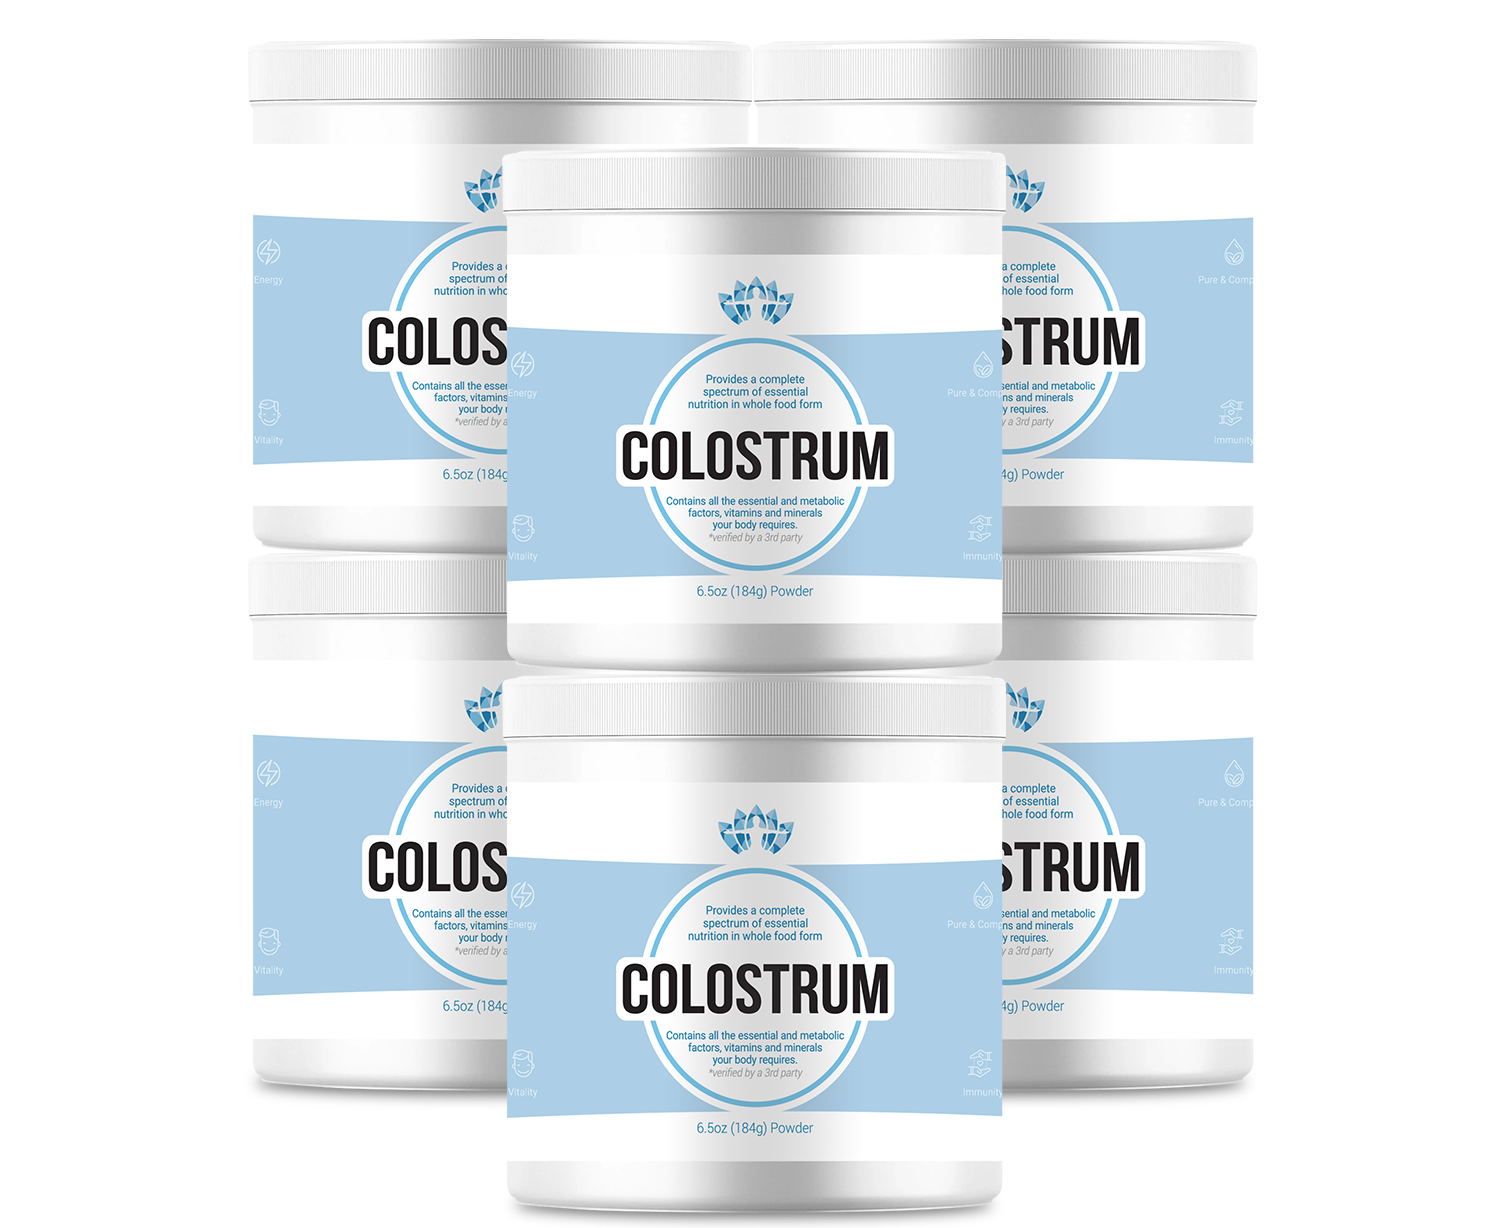 6 bottles of colostrum. Colostrum benefits have been proven to boost your immunity and provide optimum health. Colostrum is delicious and can be used in your favourite smoothie recipe.